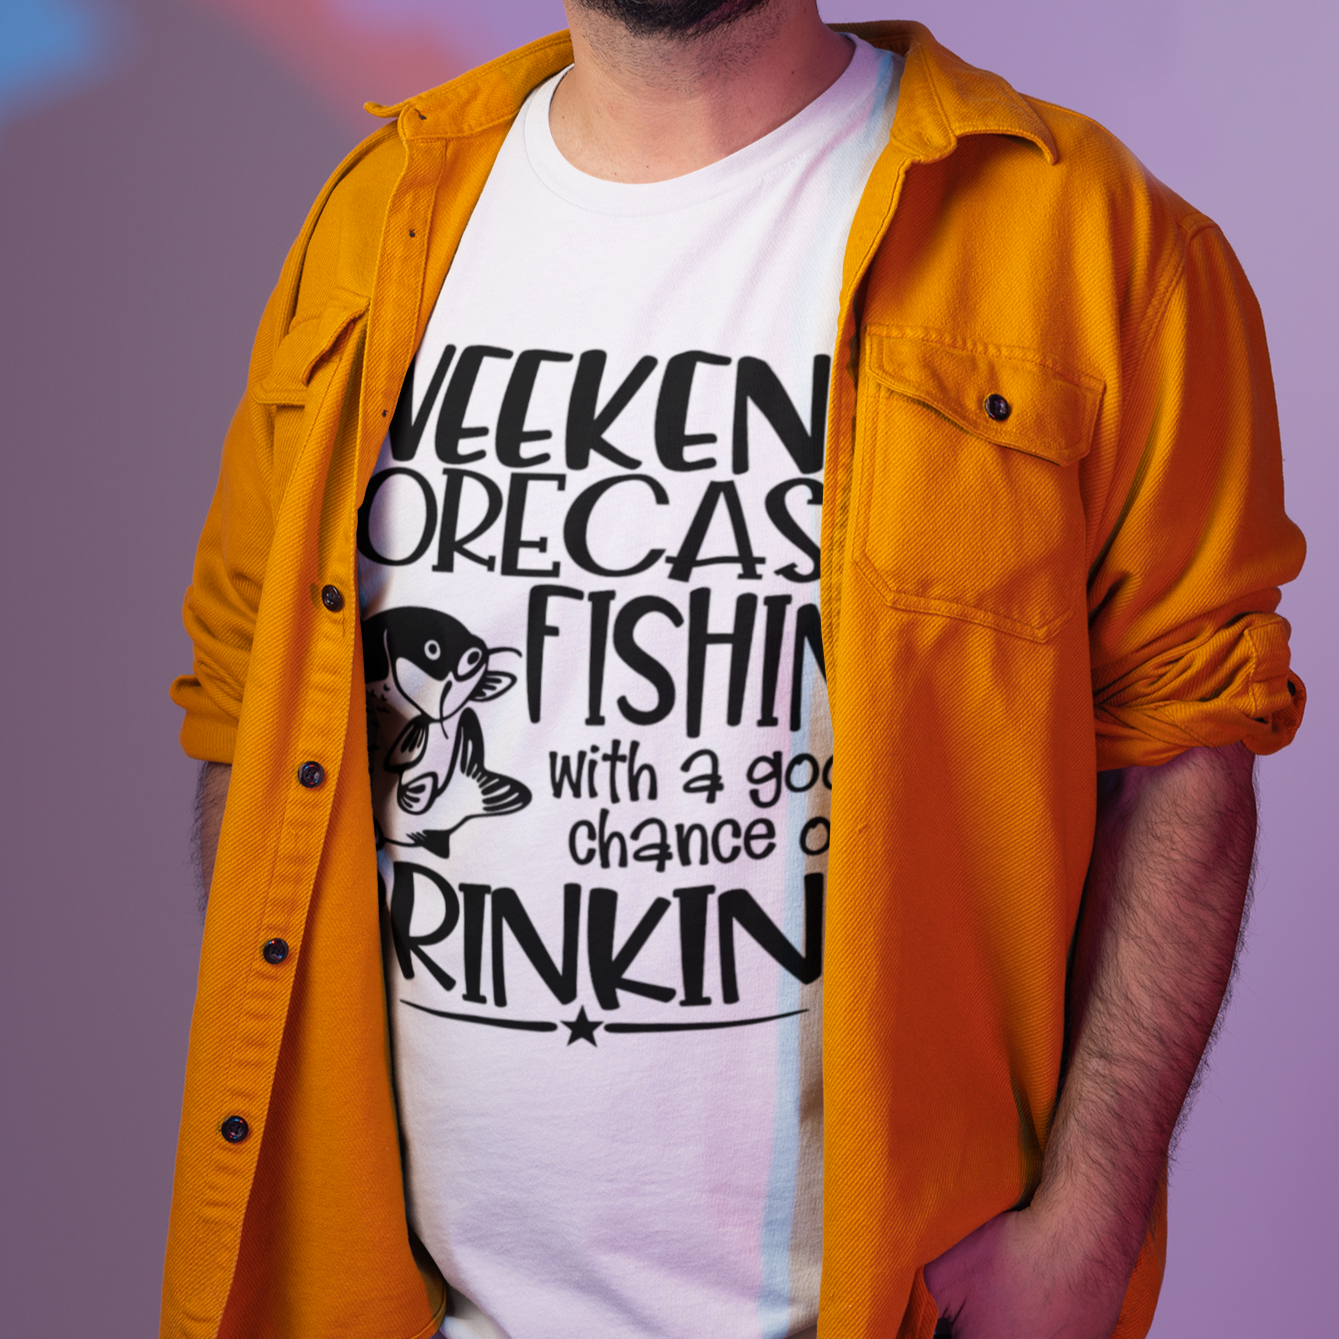 weekend-forecast-fishing-with-a-good-chance-of-drinking-white-t-shirt-round-neck-tee-mockup-of-a-smiling-man-with-short-hair-at-a-studio